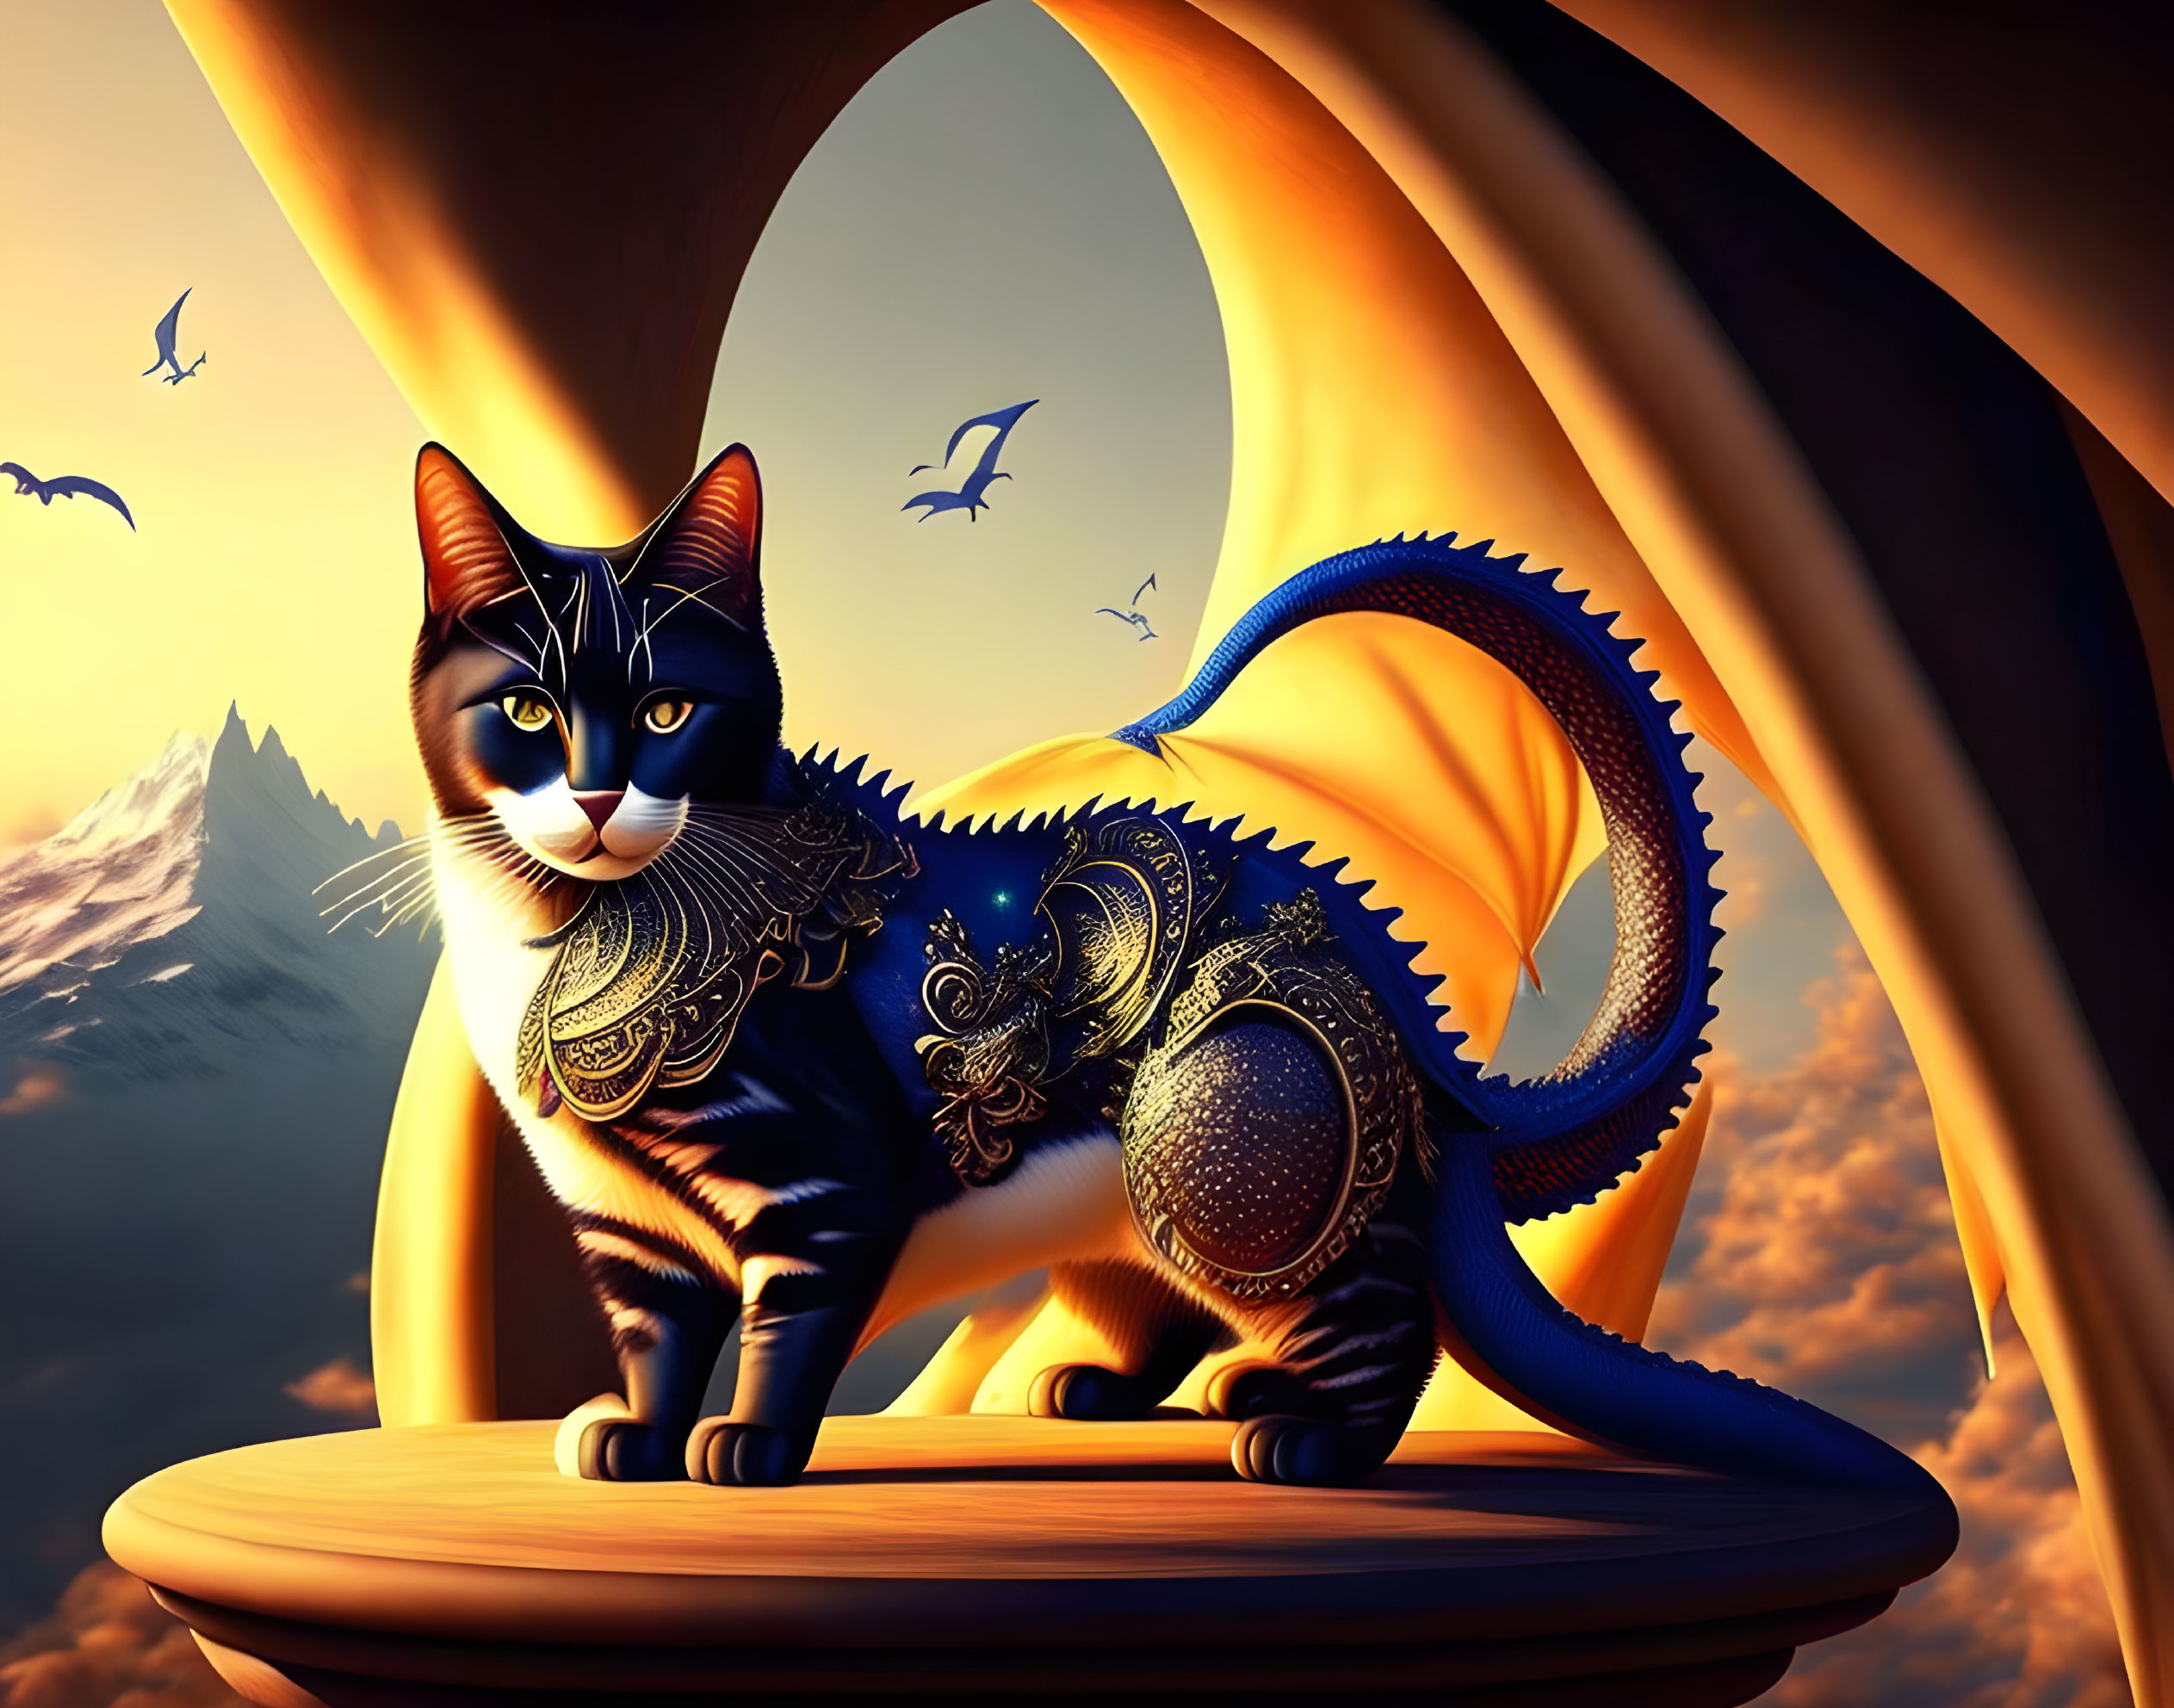 Fantasy-inspired cat with ornate patterns and dragon-like tail in sunset setting